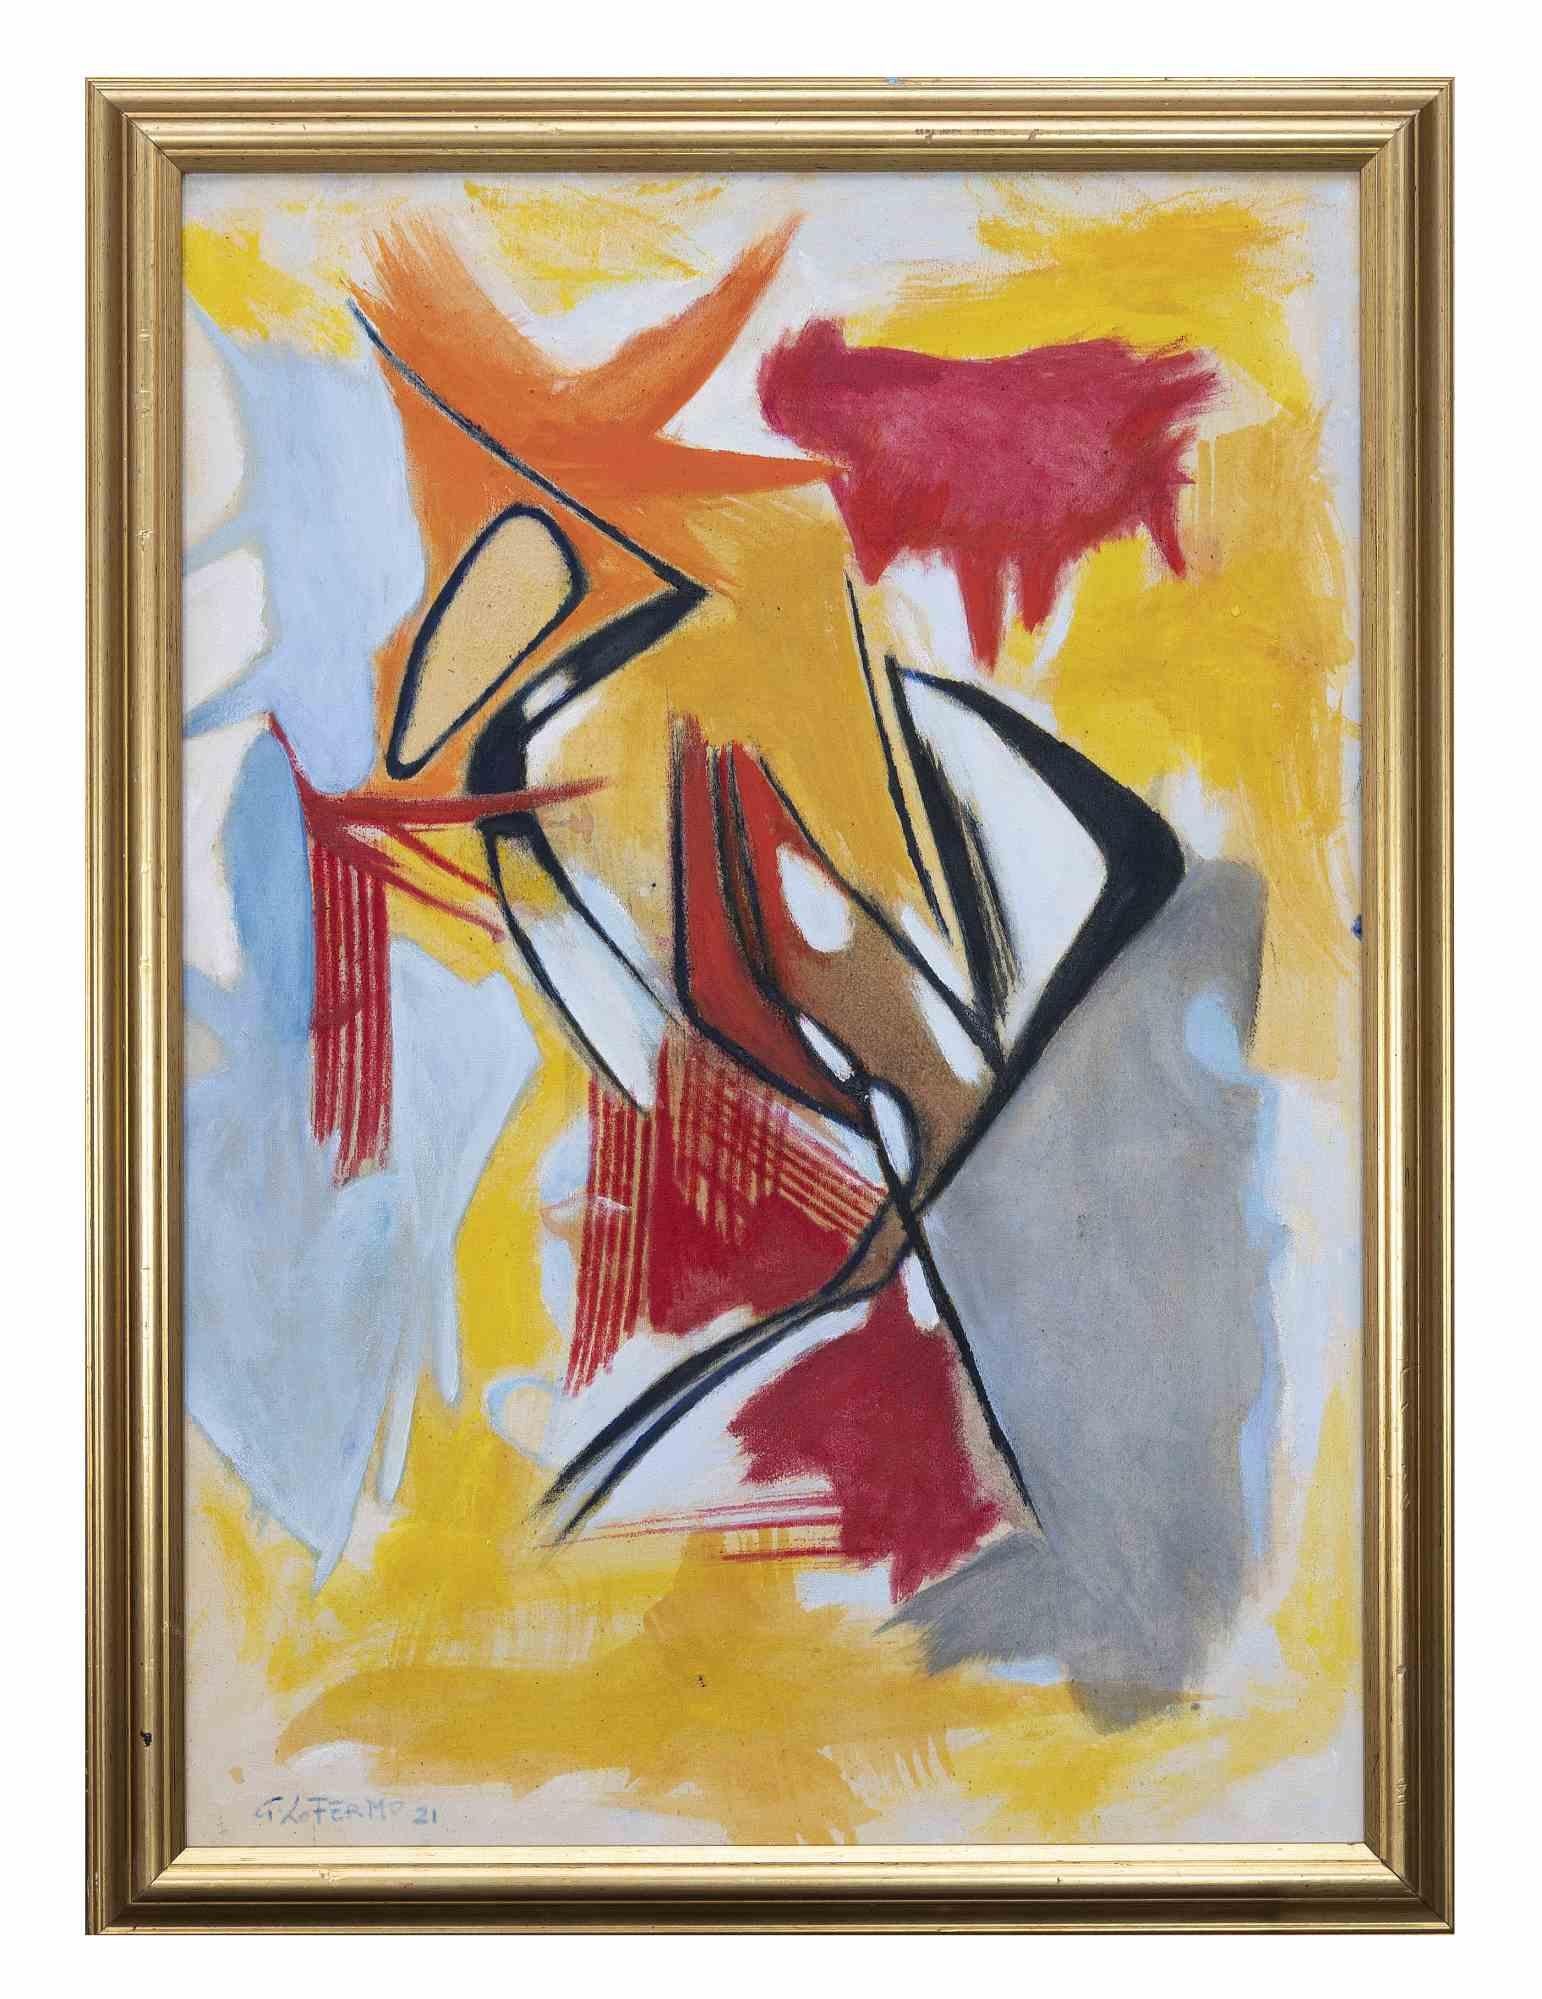 Abstract Composition is an original Contemporary artwork realized by Giorgio Lo Fermo (b. 1947) in 2021.

Original Oil Painting.

Hand-signed, titled and dated on the back of the canvas.

Hand-signed and dated on the lower left corner: G. Lo Fermo